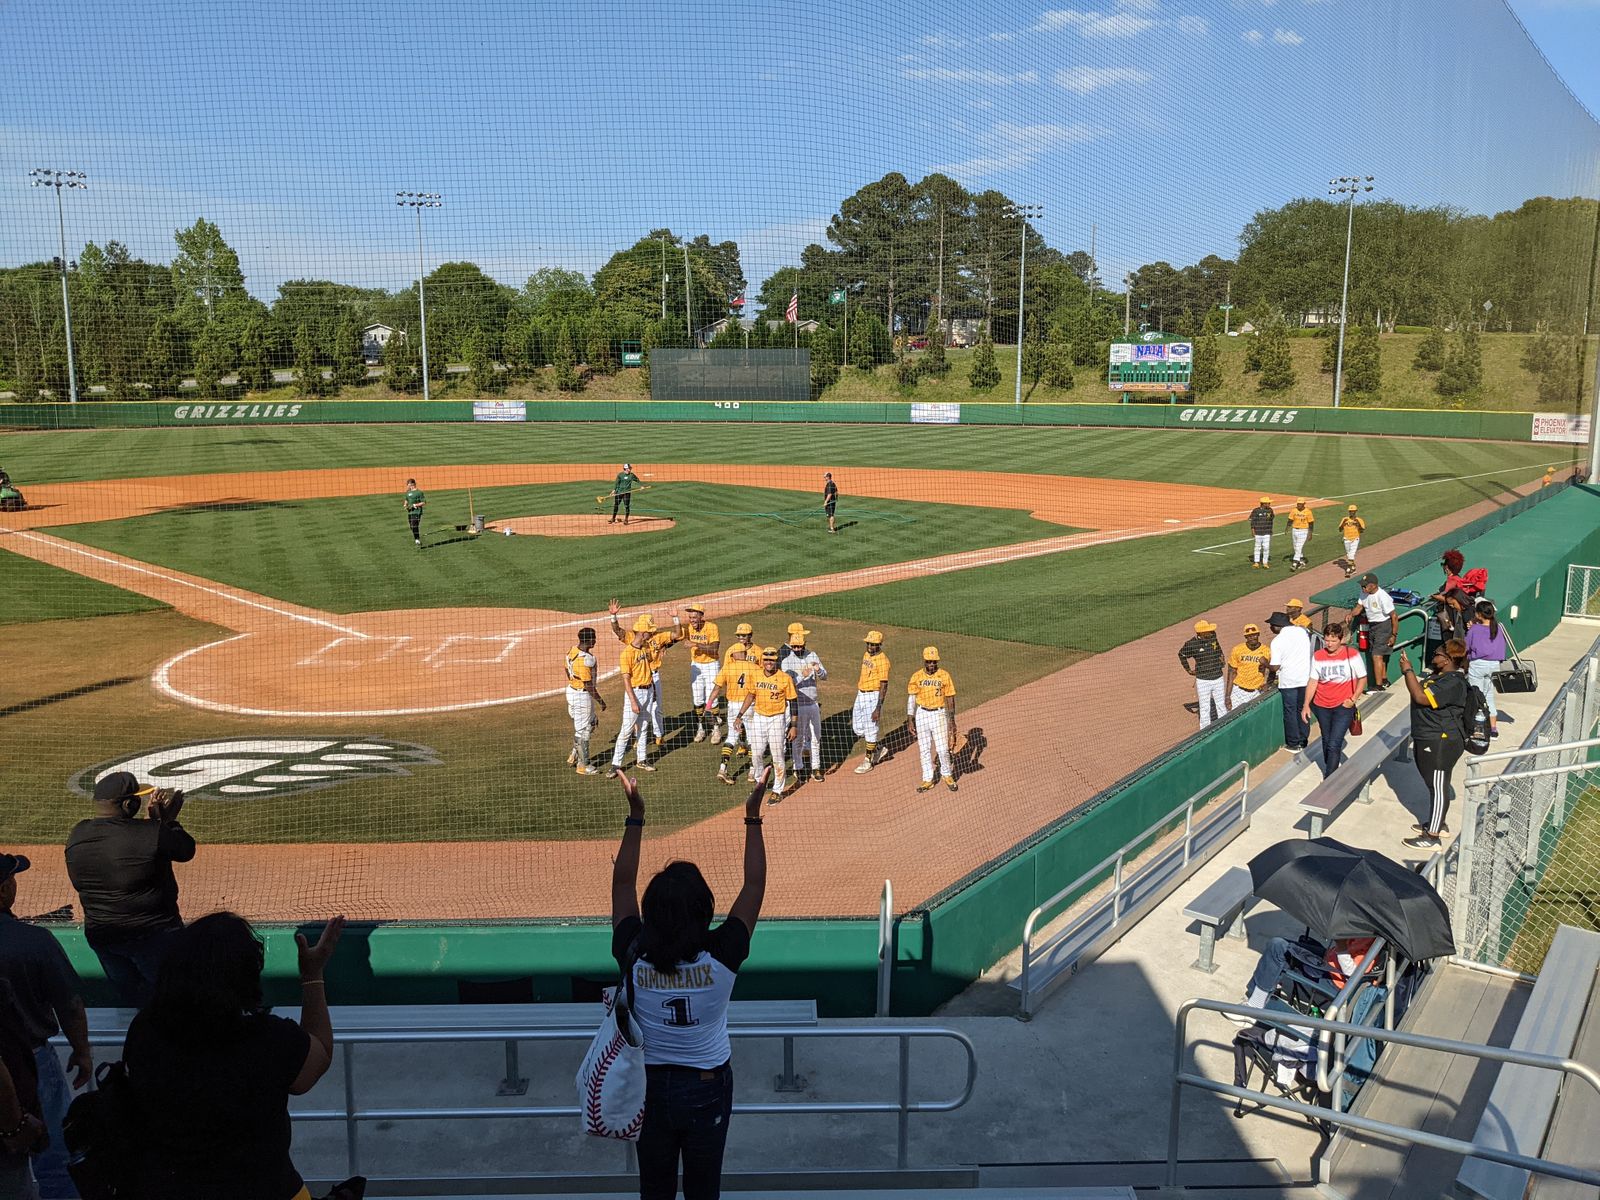 XULA moves on in baseball playoffs after downing Crowley's Ridge 16-5